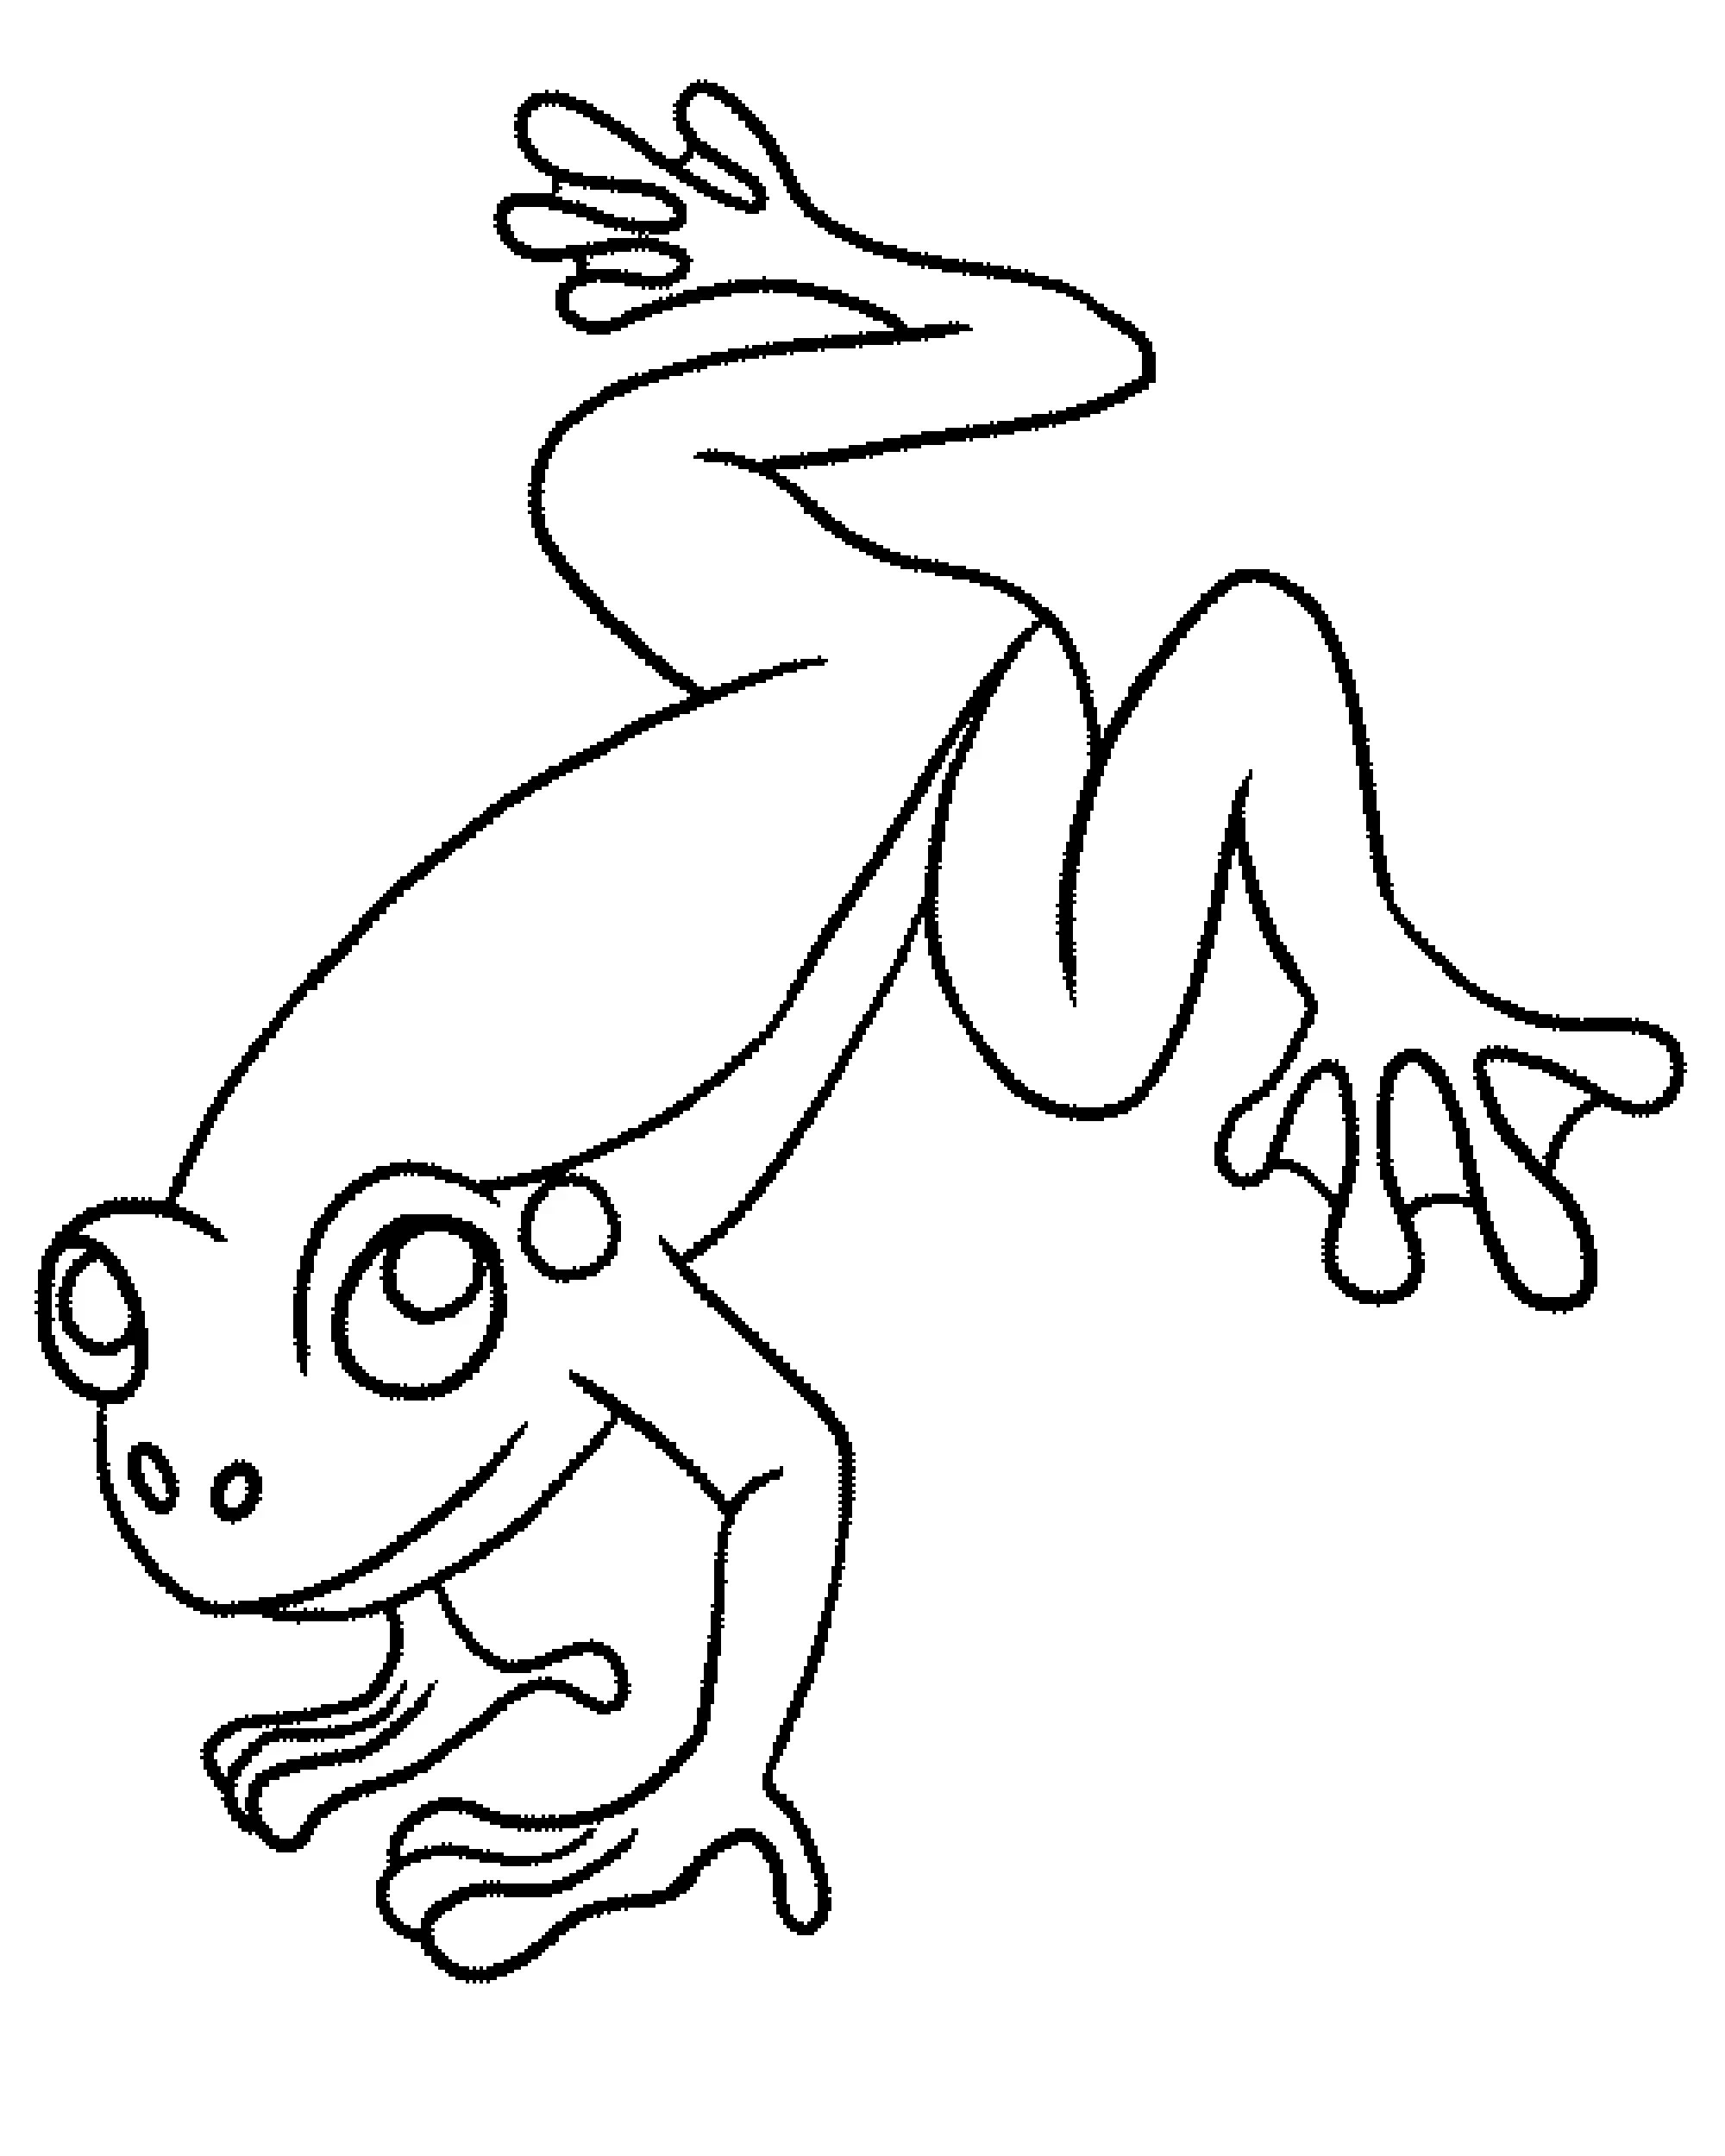 Printable Amphibian Coloring Pages - Amphibian Coloring Pages To Print